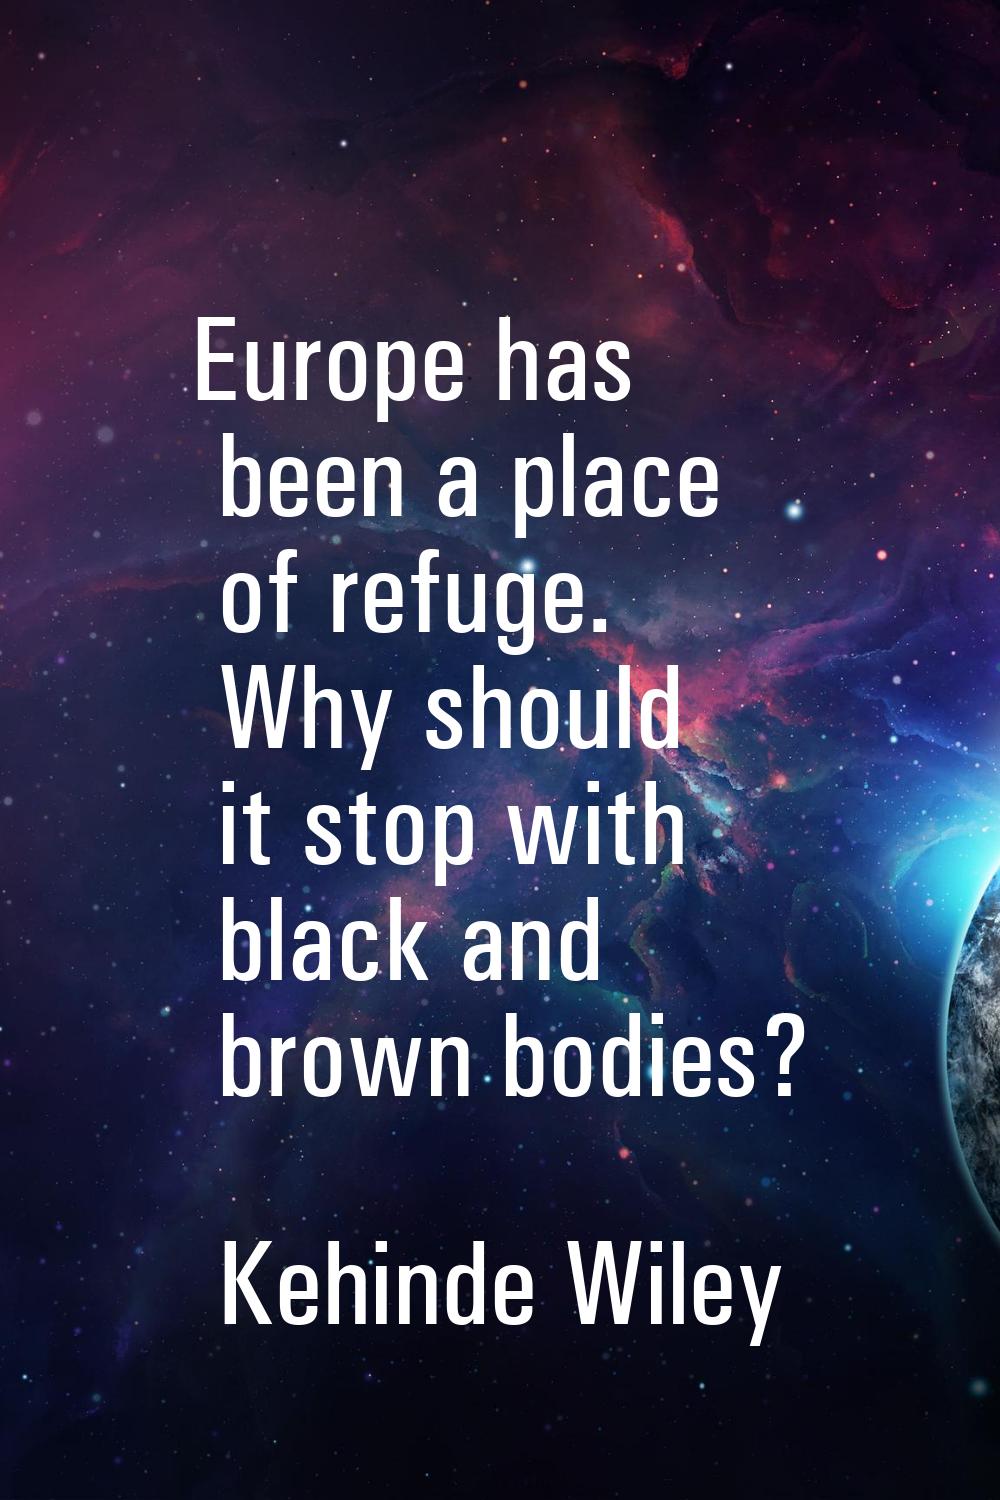 Europe has been a place of refuge. Why should it stop with black and brown bodies?